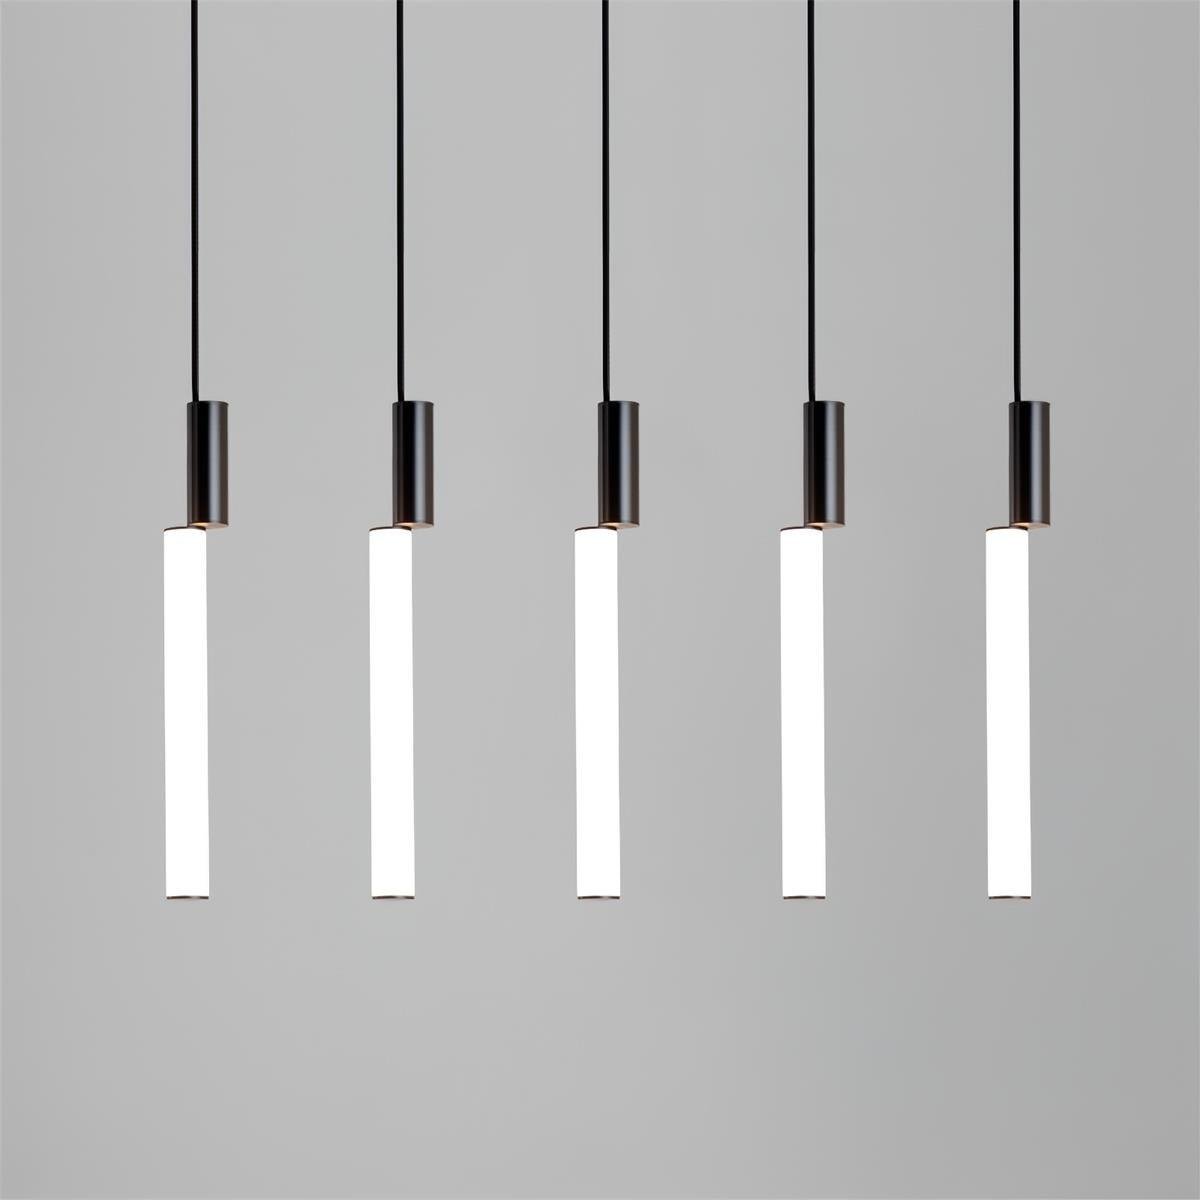 LED Pendant Light with 5 Signal Heads, 23.6" Diameter x 59" Height or 60cm Diameter x 150cm Height, in Black and White, emitting Cool Light.